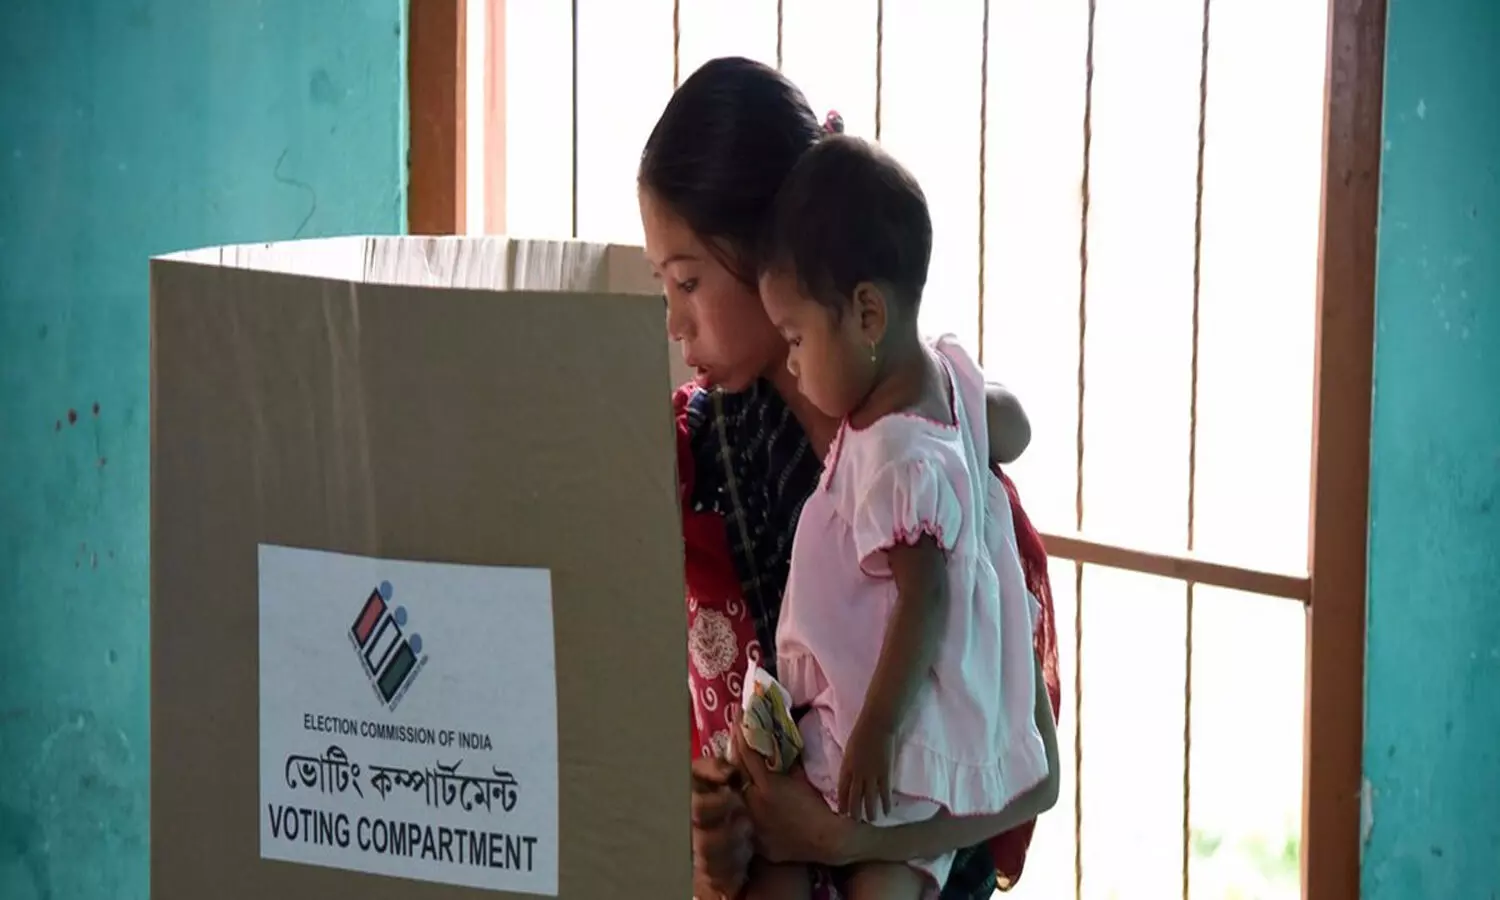 West Bengal Assembly Elections: Voting begins for 5th phase under COVID-19 shadow